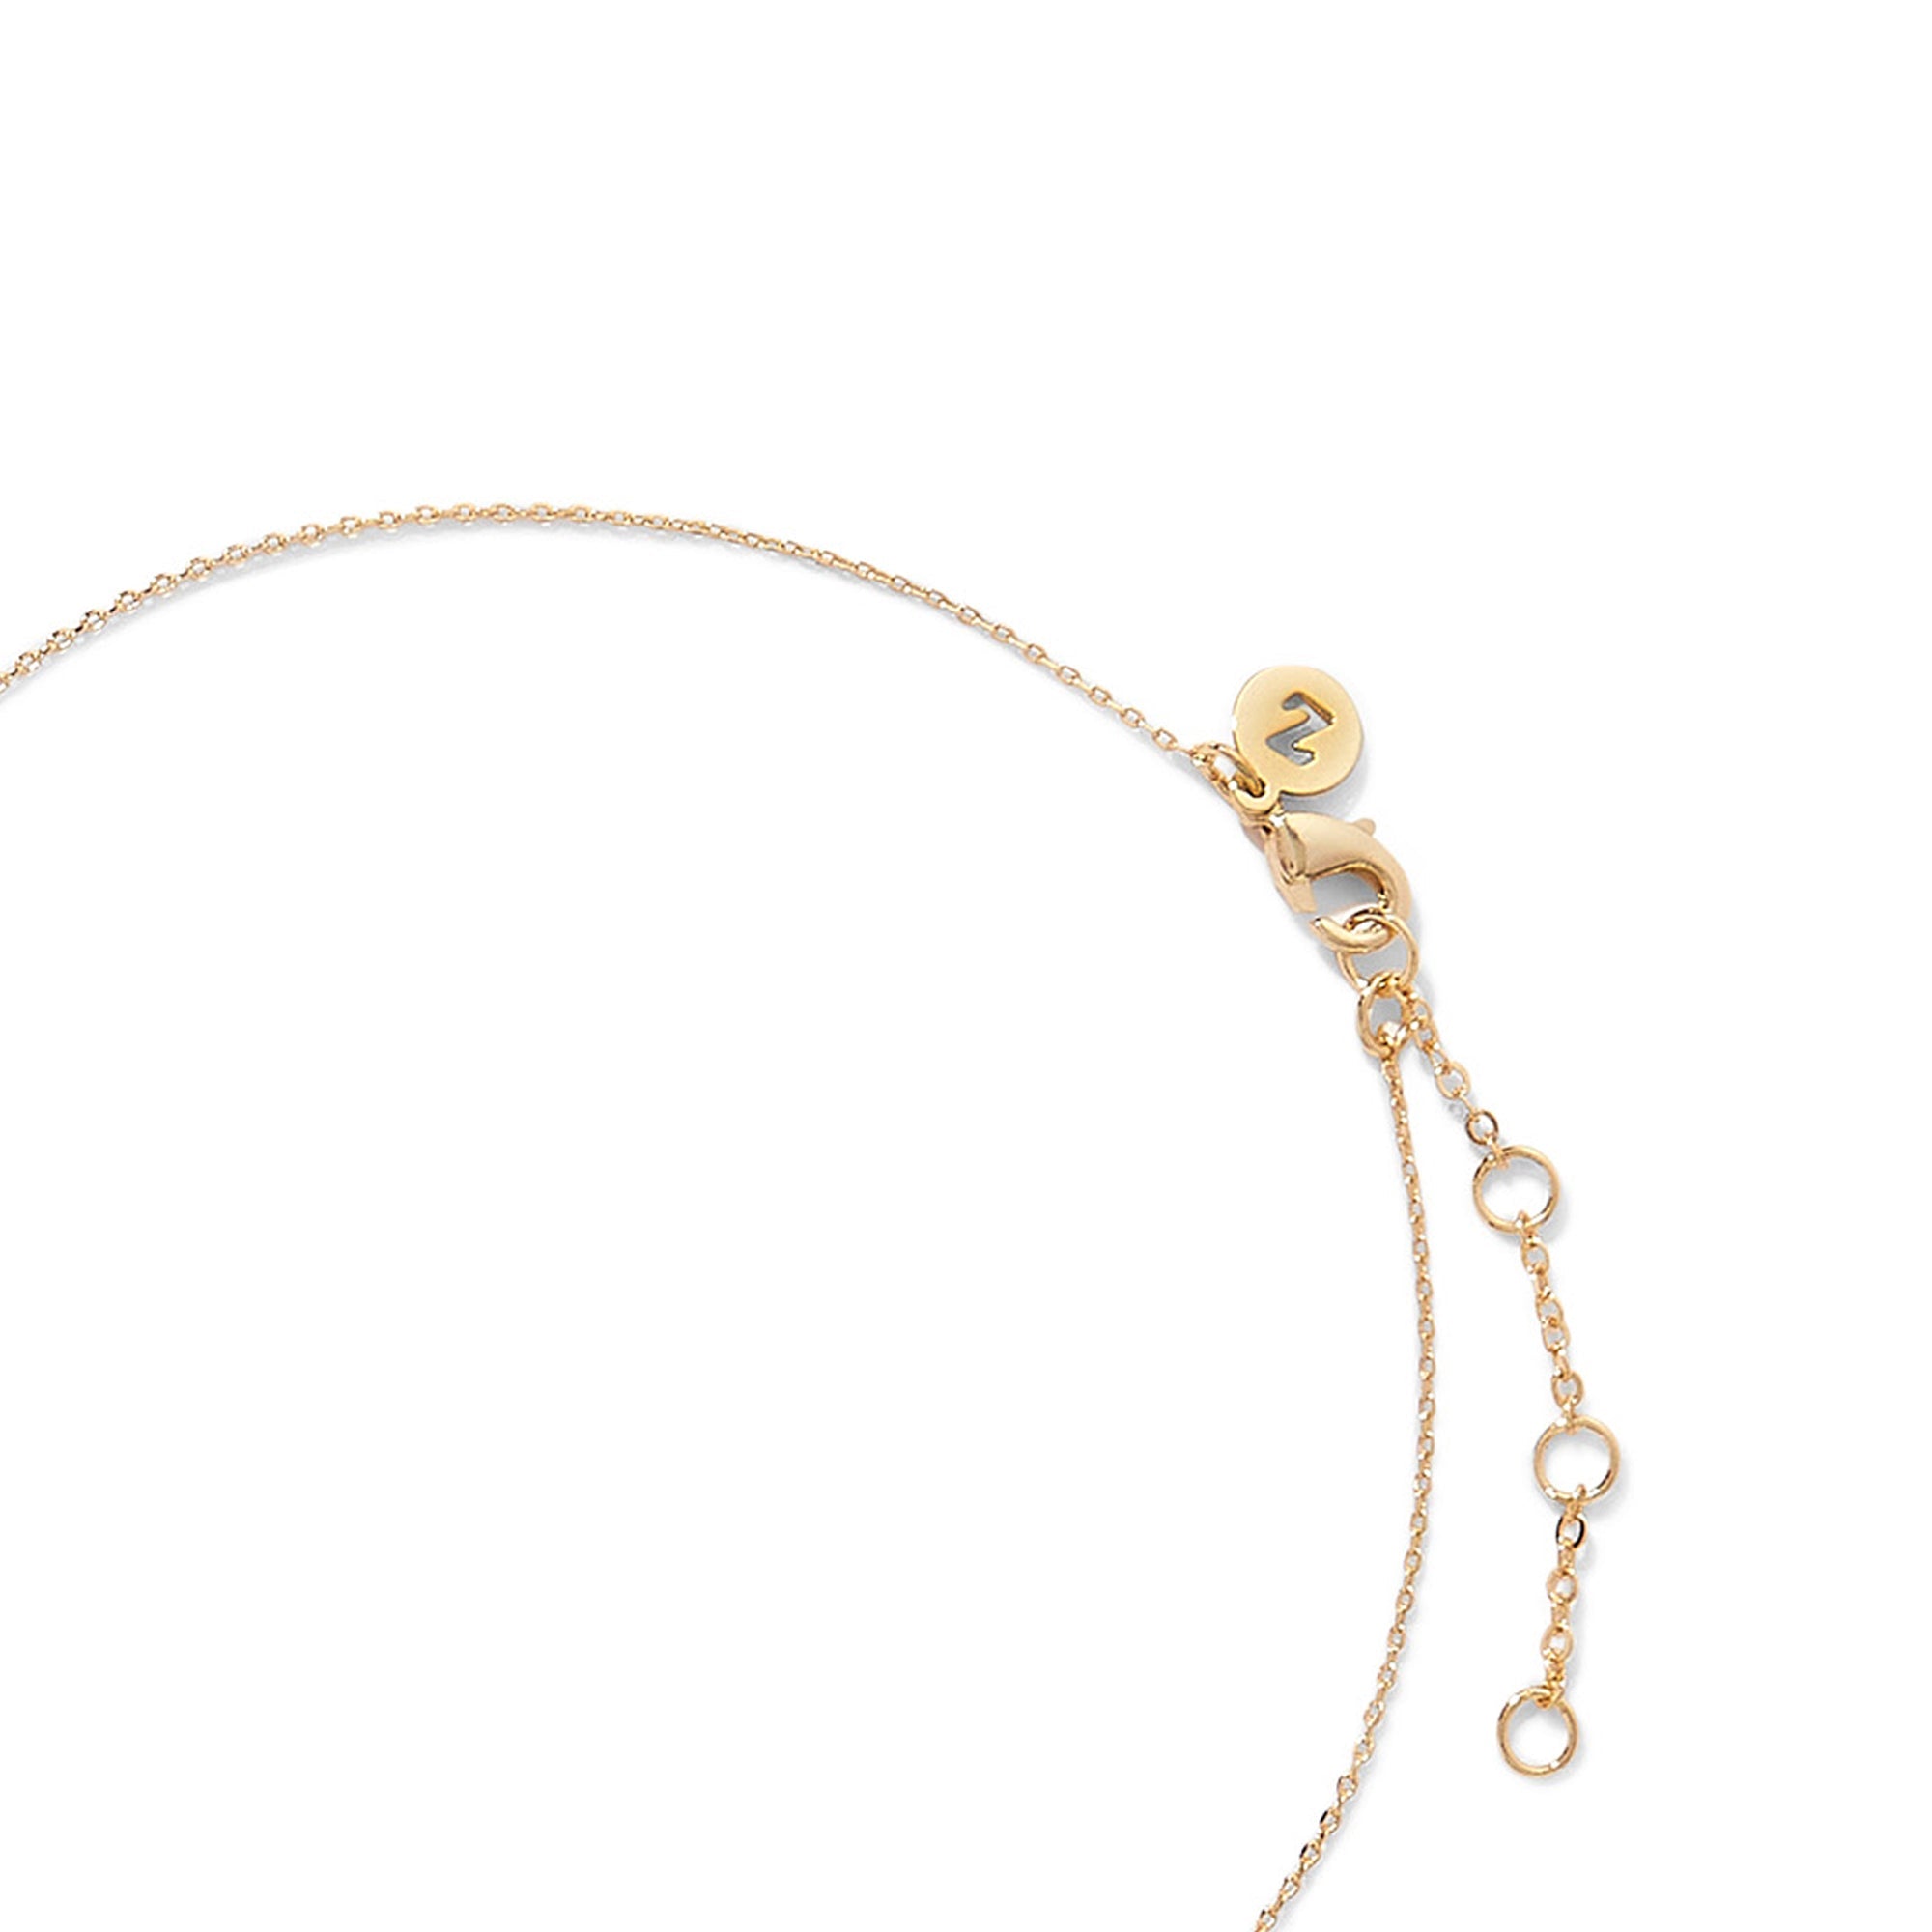 Real Gold Plated Z Modern Heirloom Coin Necklace For Women By Accessorize London